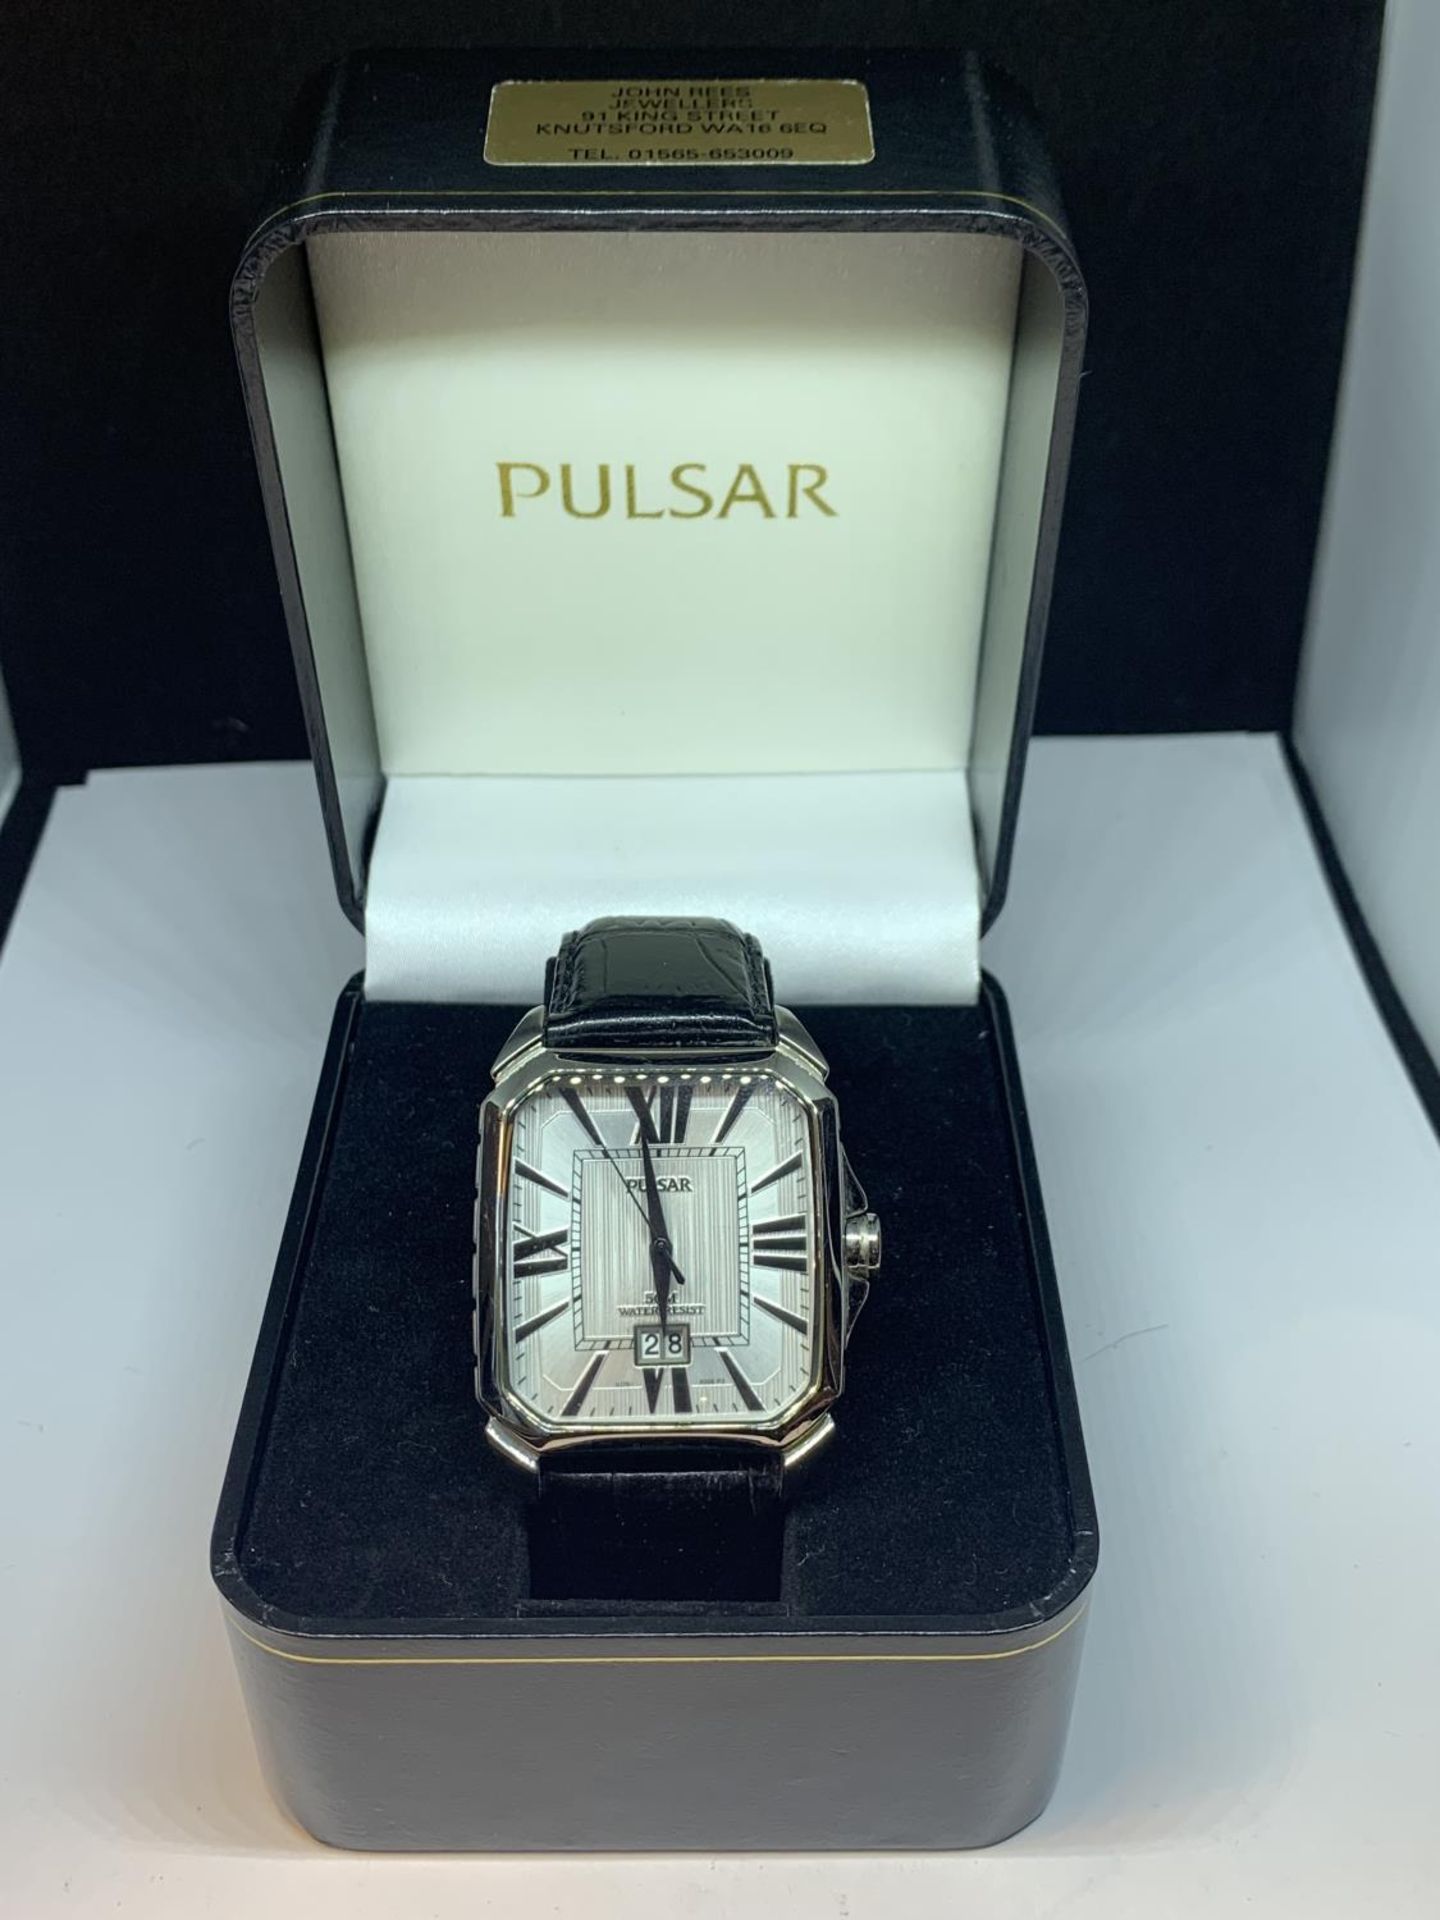 A PULSAR CALENDAR WRIST WATCH WITH LARGE SQUARE FACE AND BLACK LEATHER STRAP IN A PRESENTATION BOX